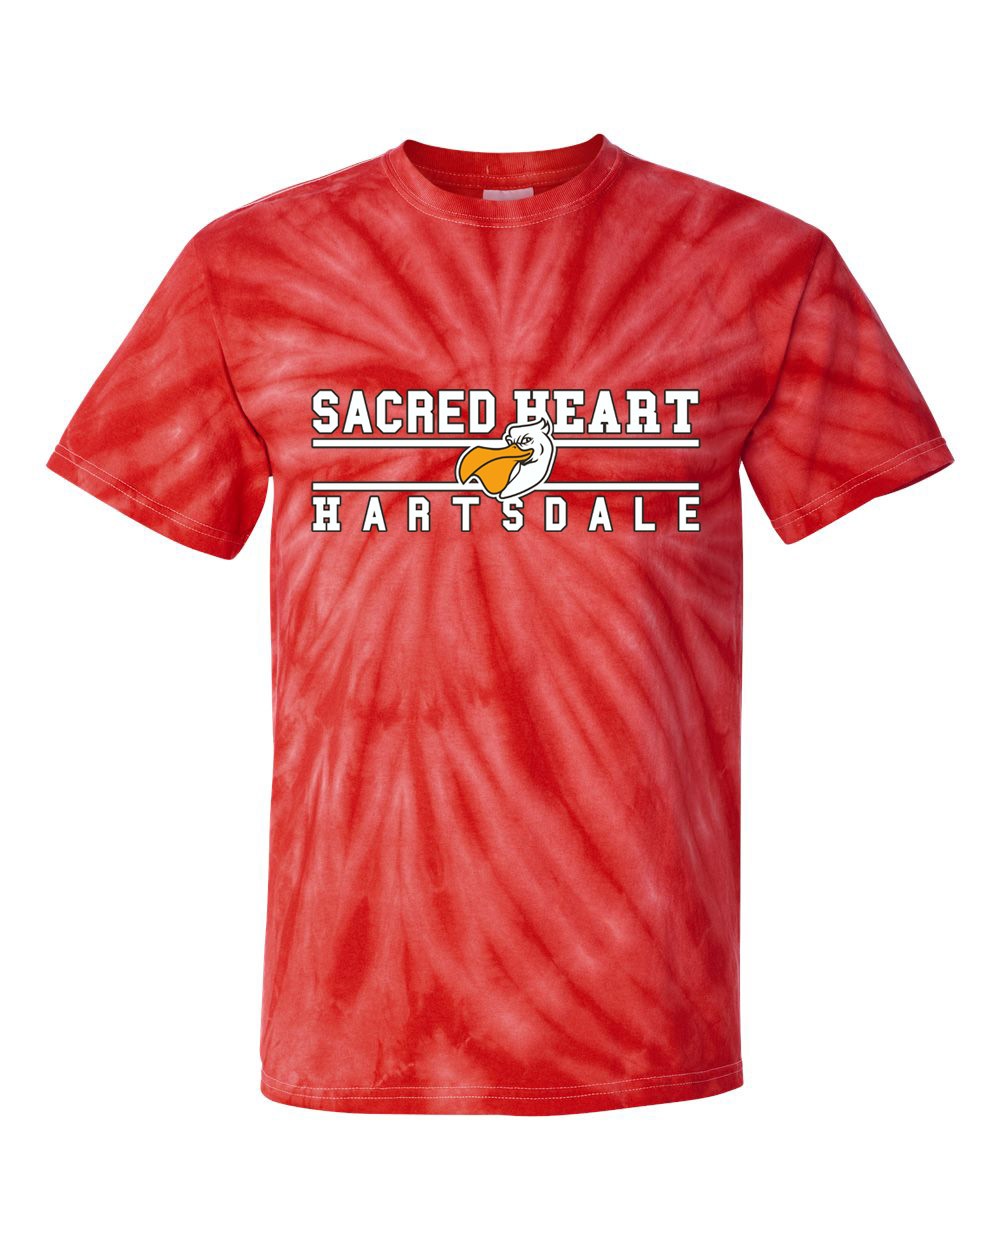 SHS Staff S/S Tie Dye T-Shirt w/ Logo - Please Allow 2-3 Weeks for Delivery